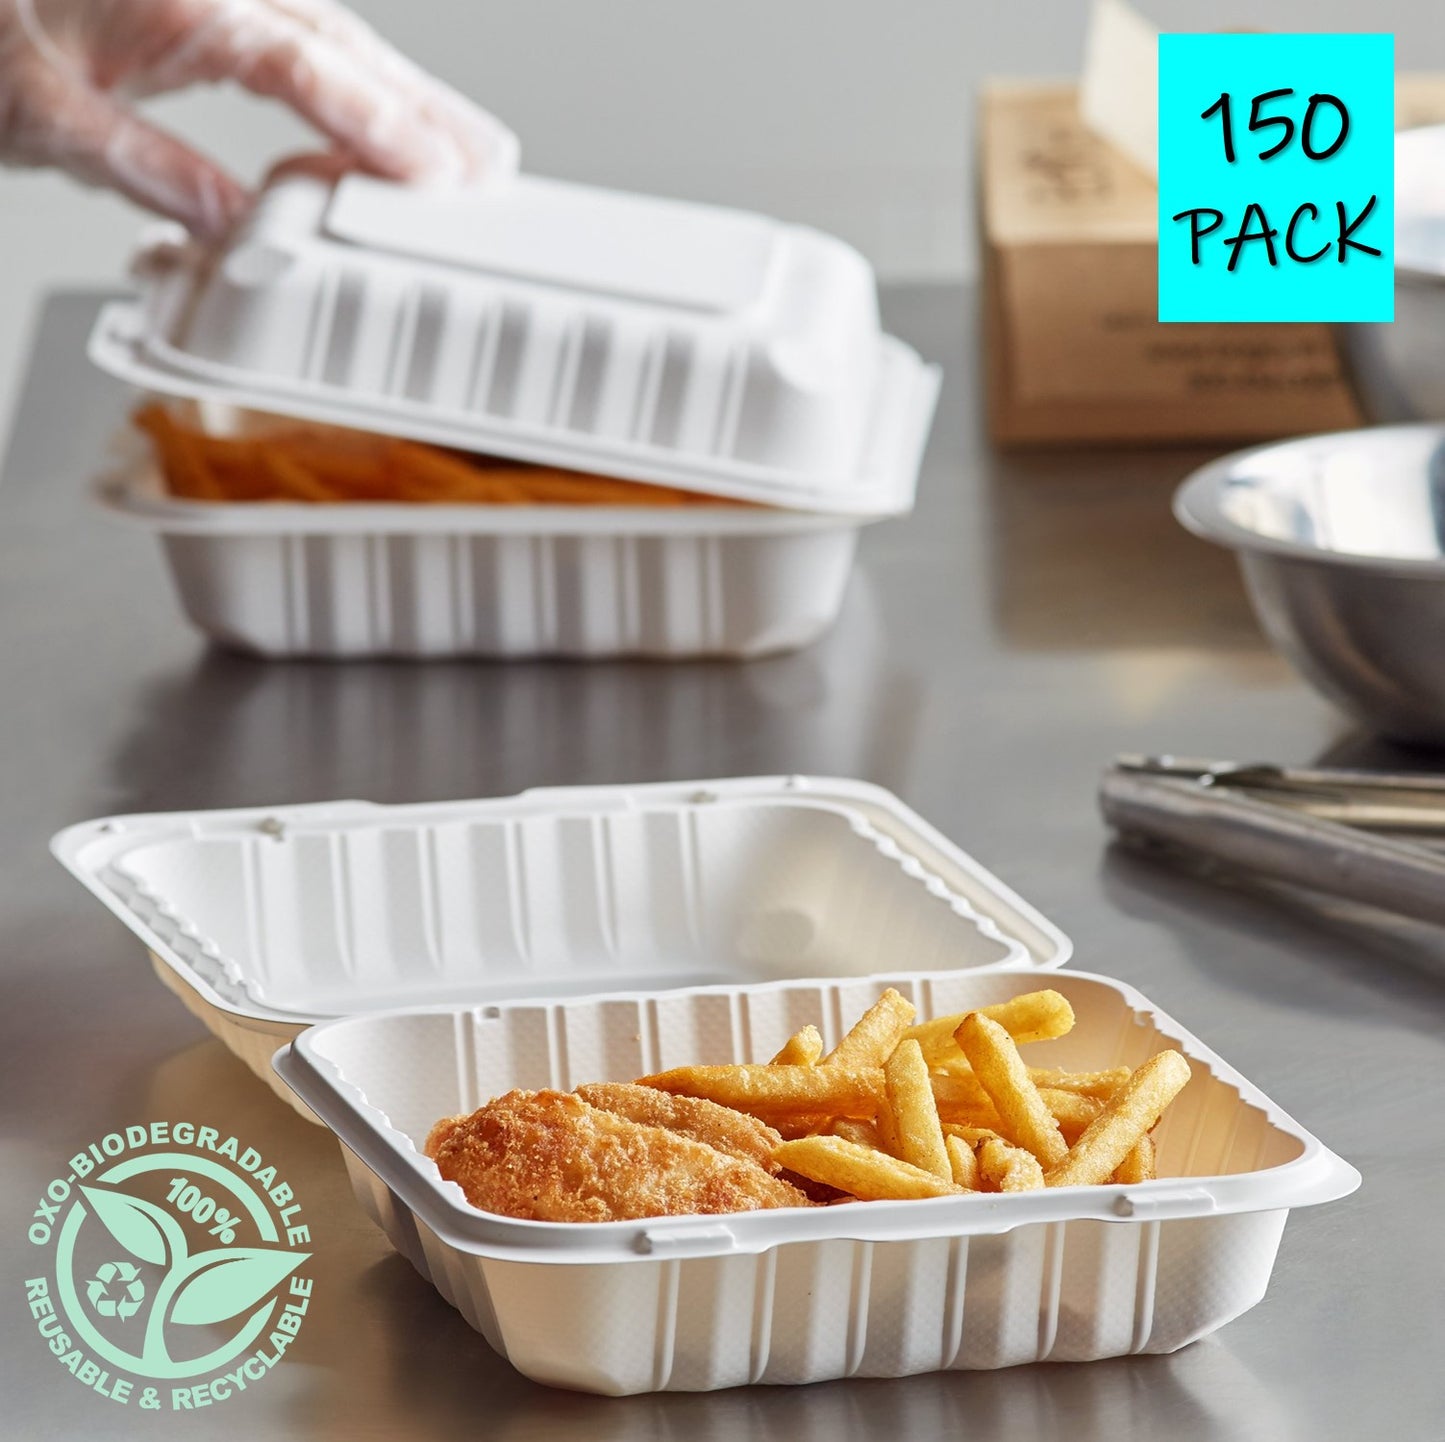 Take Out Clamshell 8" 1 Compartment 8X8X3 Microwaveable Eco-Friendly 150 Pack